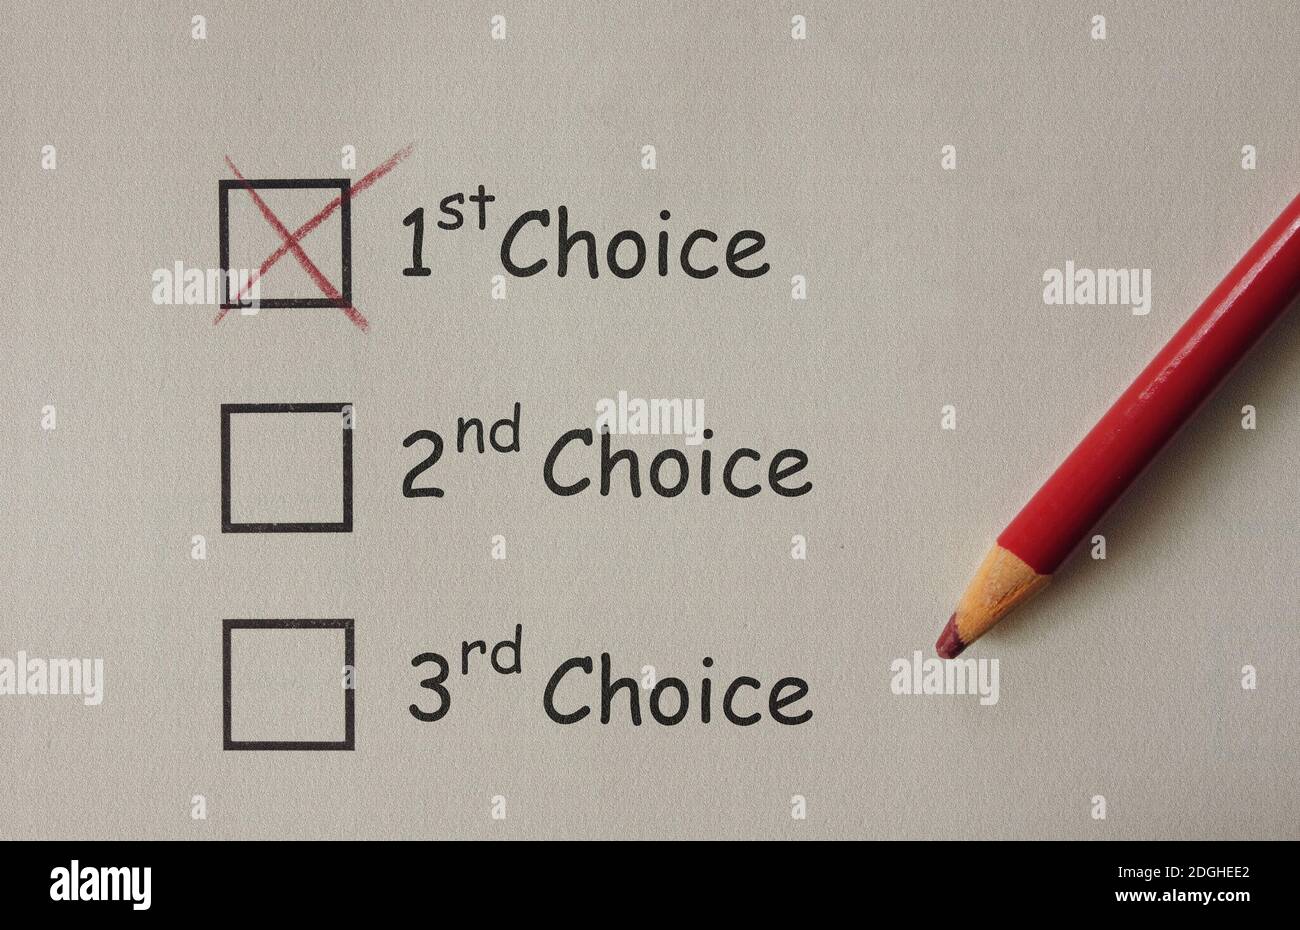 First Choice opinion form Stock Photo